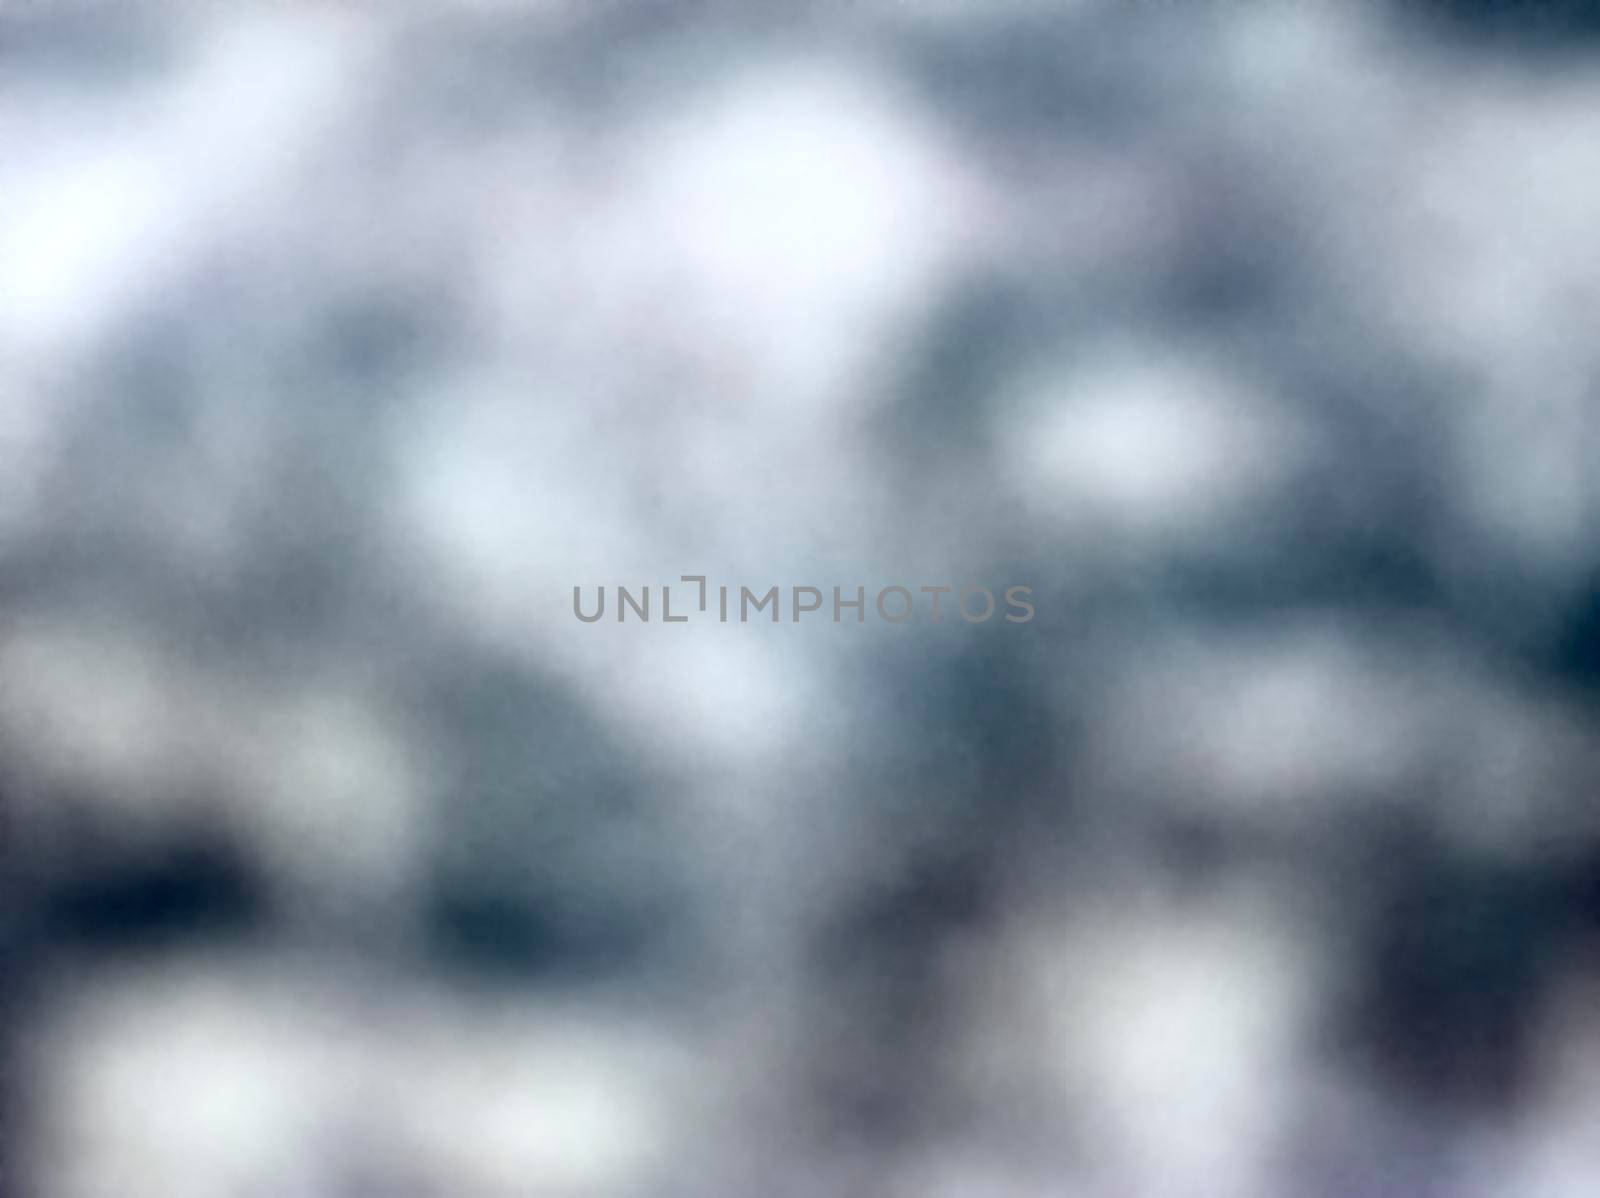 Abstract background image in gray-blue blurred tones